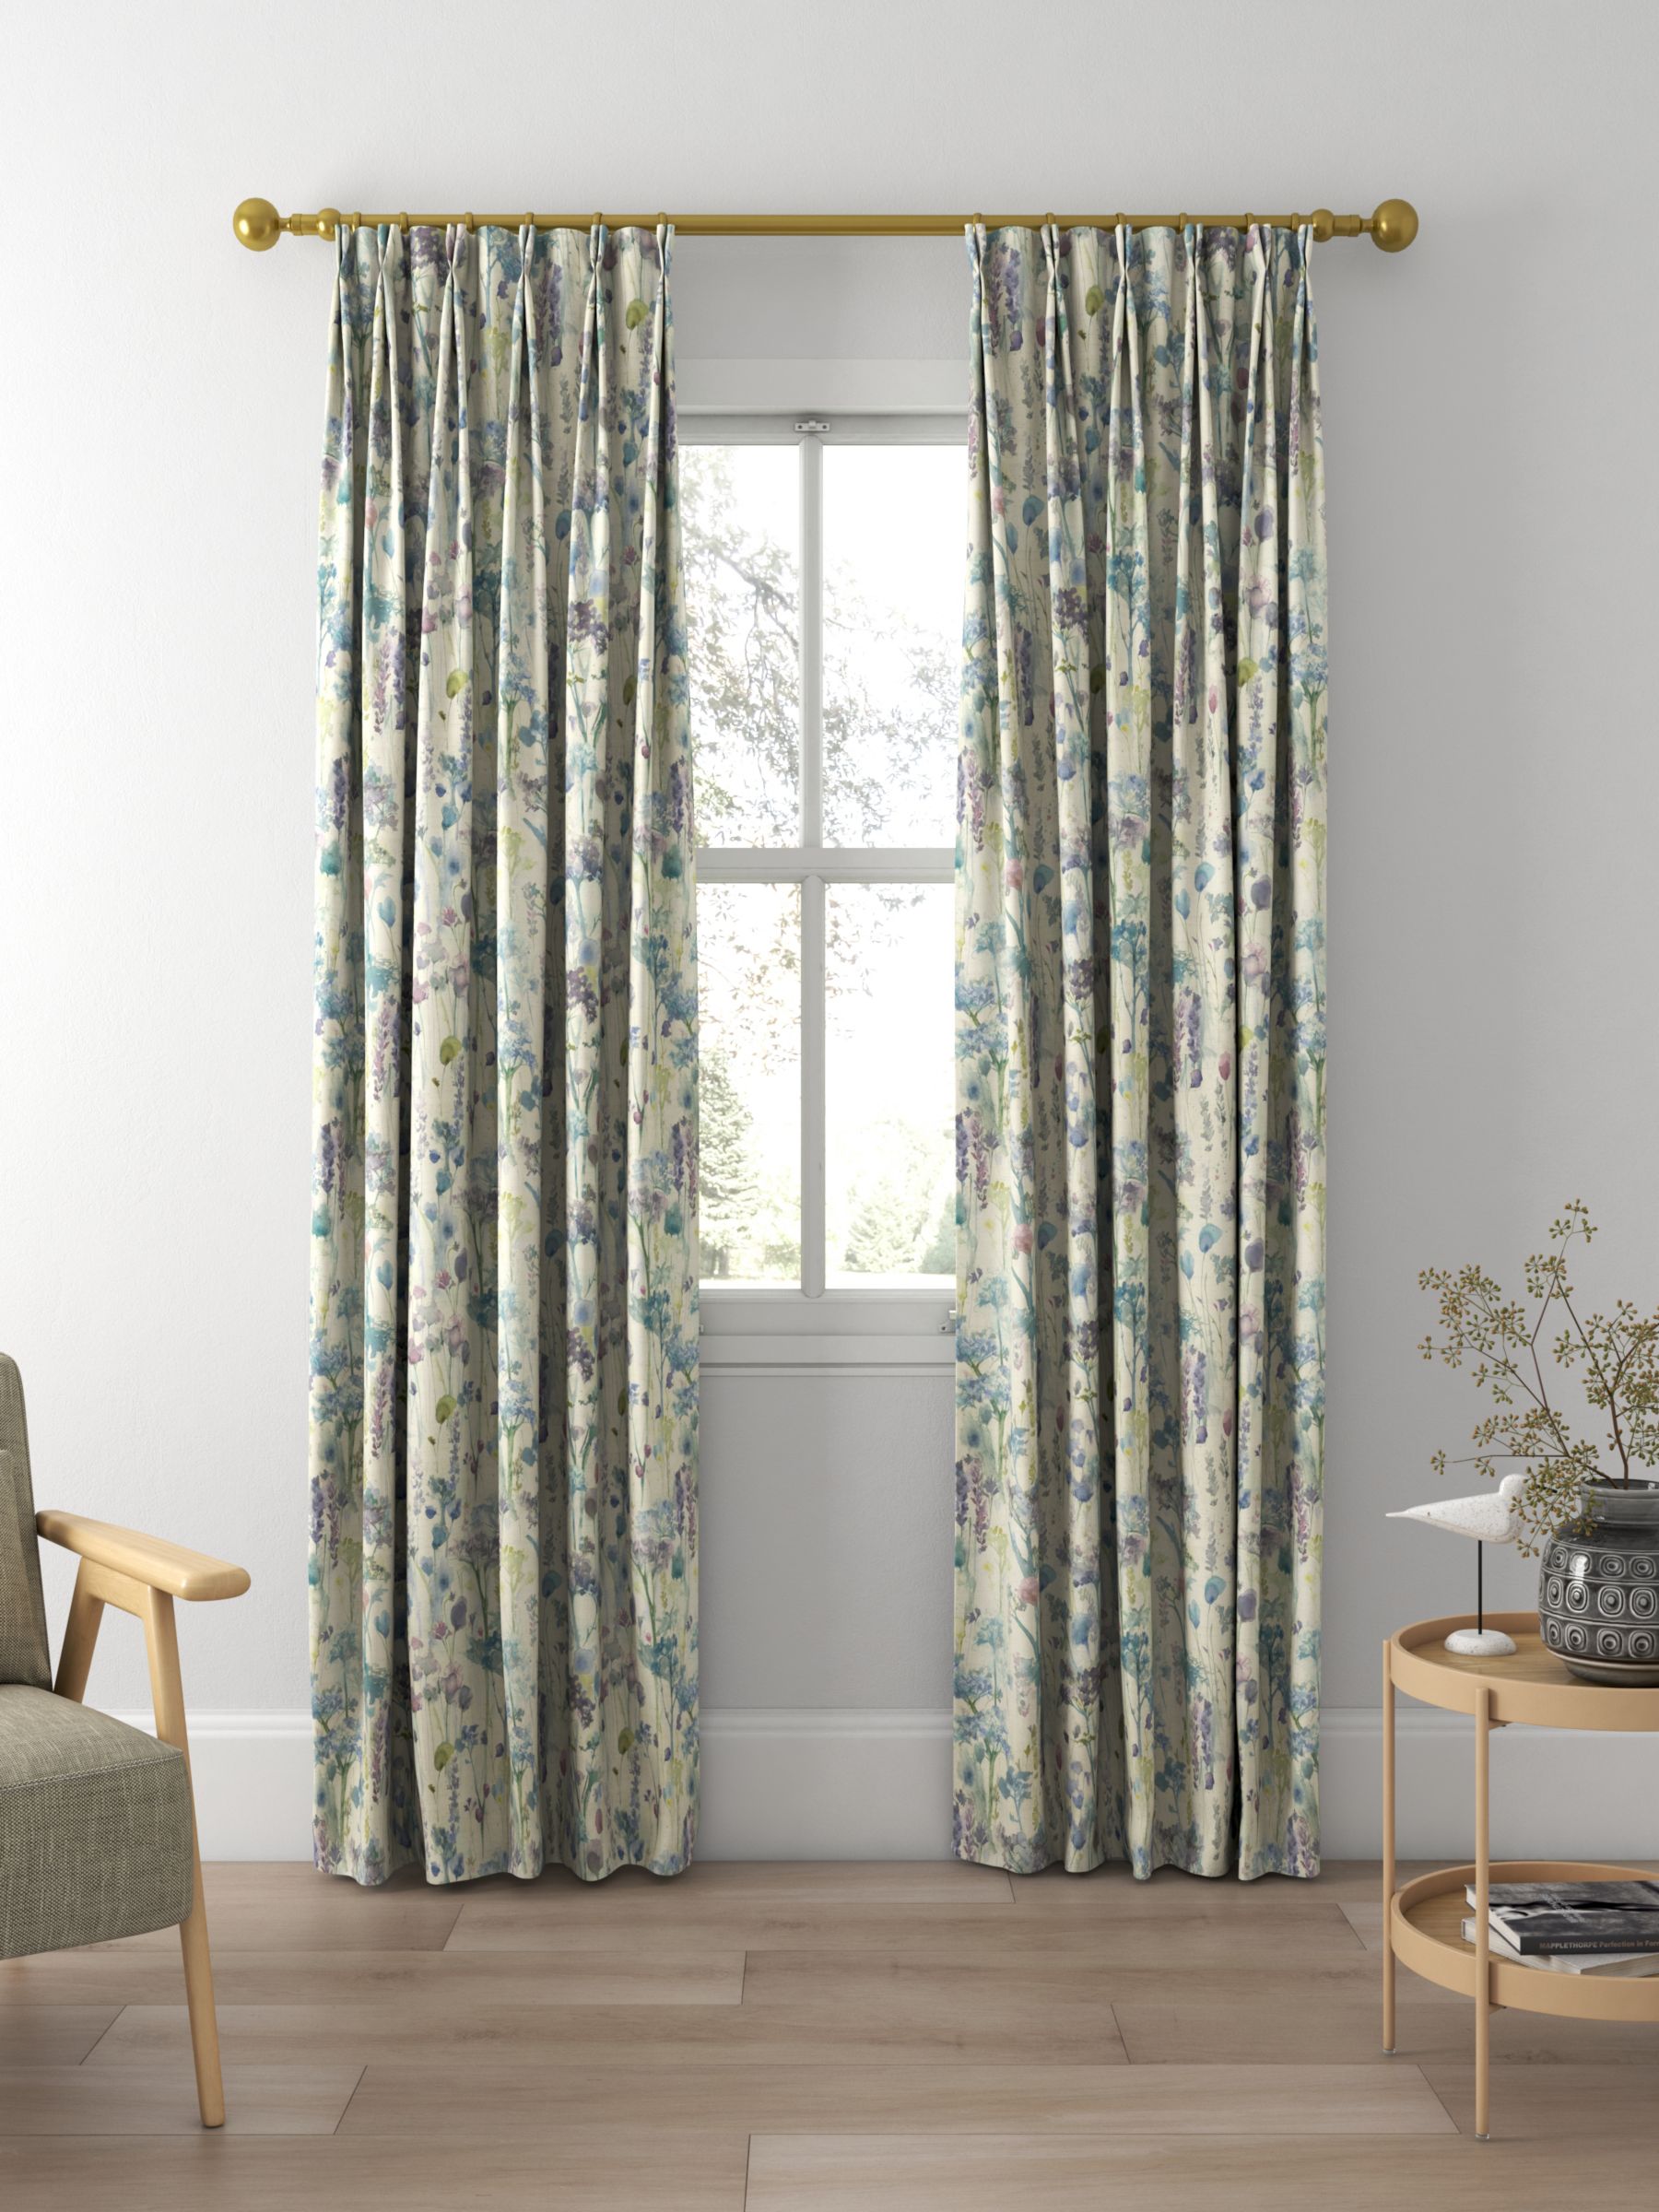 Voyage Ilinzas Made to Measure Curtains, Violet Natural